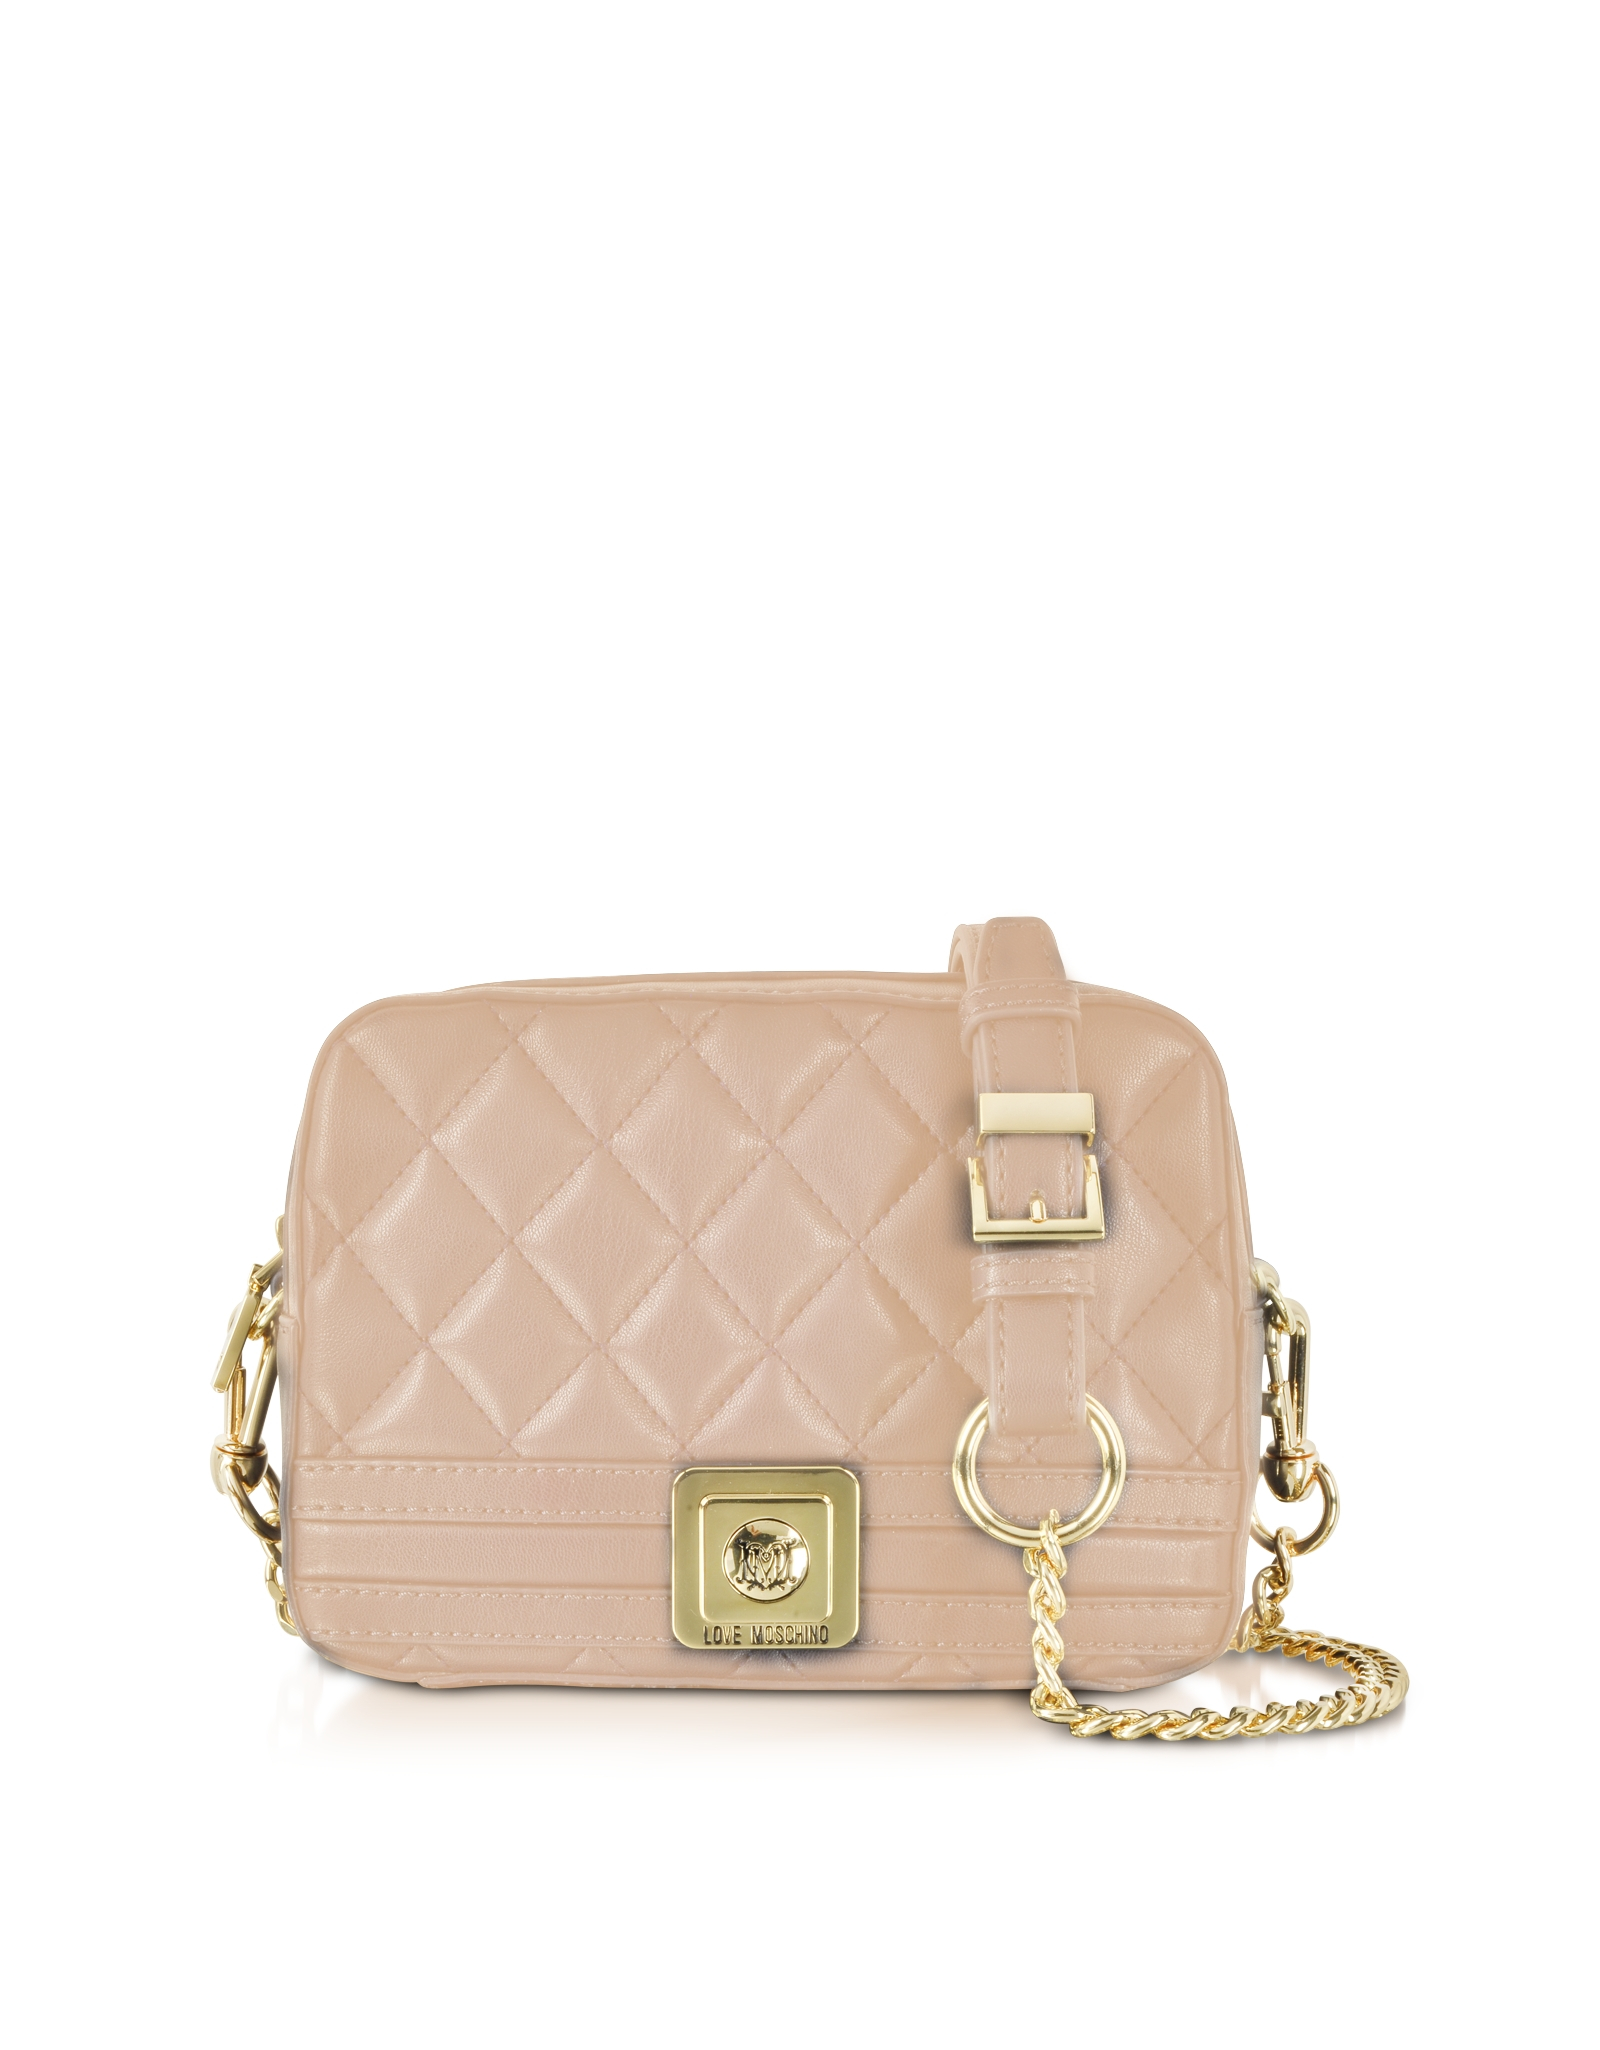 Love Moschino Quilted Eco Leather Crossbody Bag in Light Pink (Pink) - Lyst